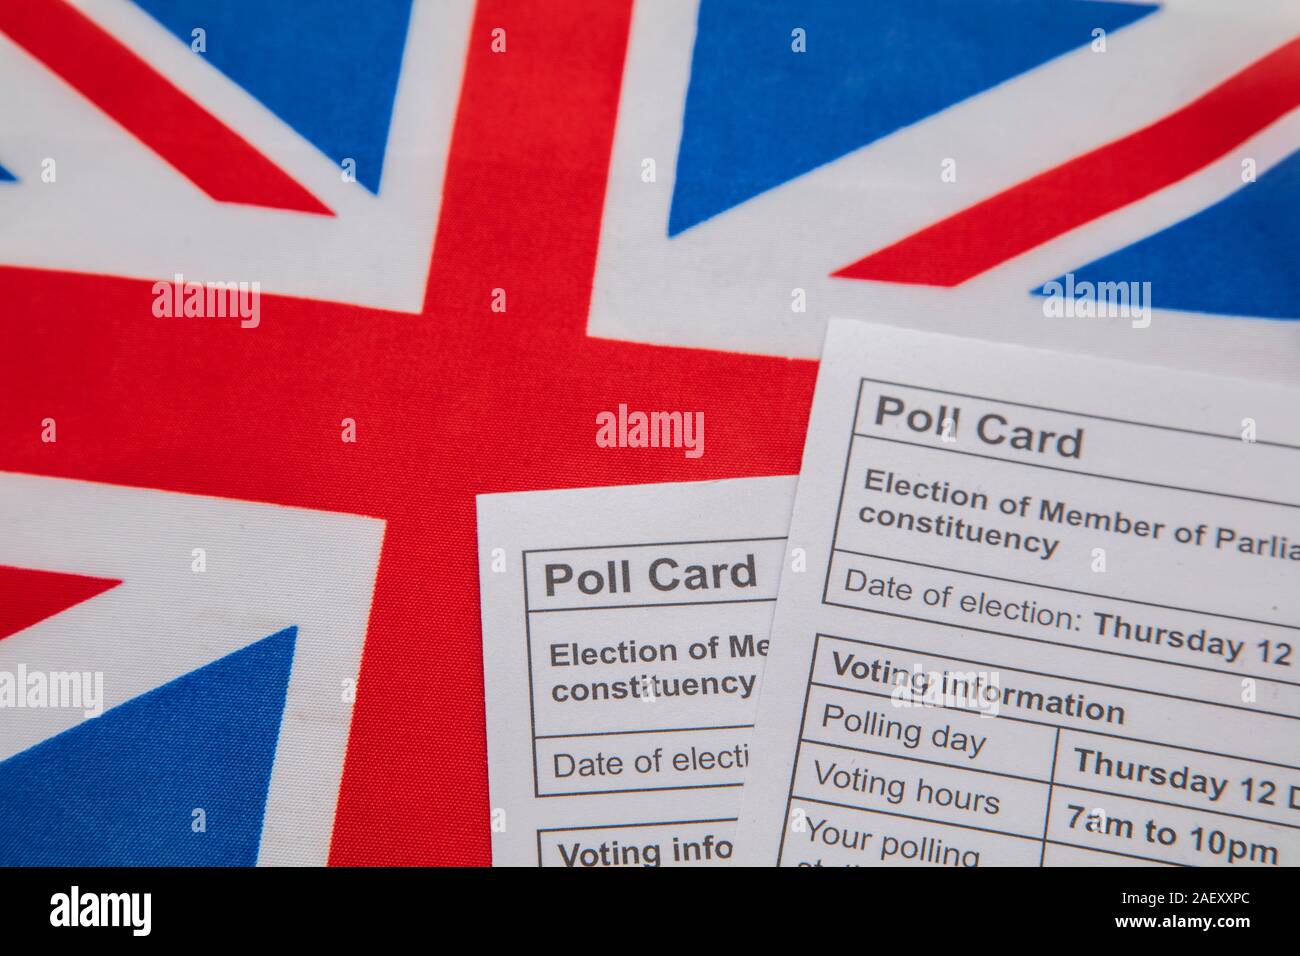 Polling vote Card for the UK General election on a Union Jack flag Stock Photo